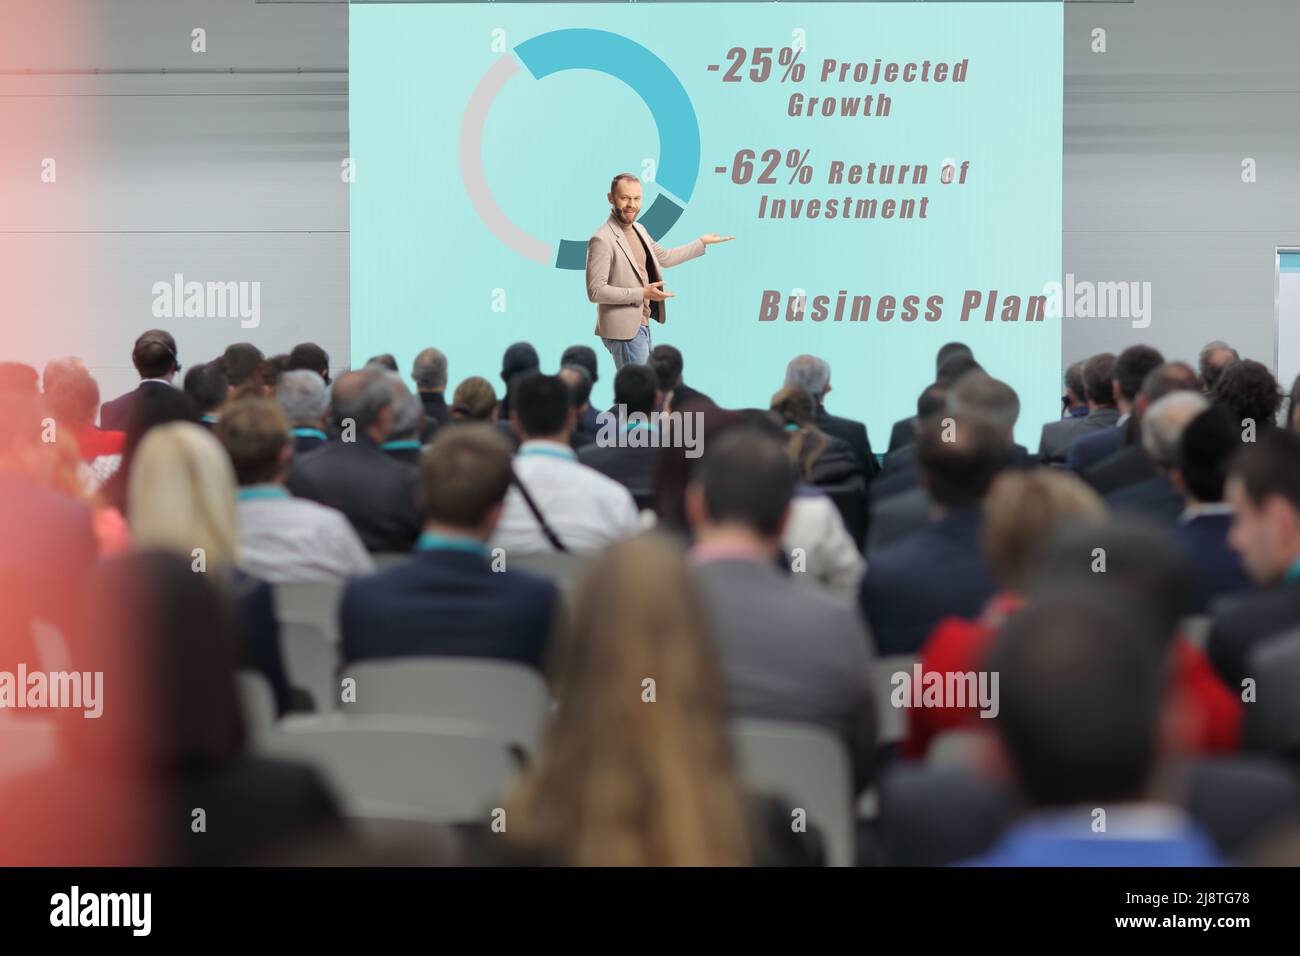 People in the audience and man presenting a business plan at a business conference Stock Photo